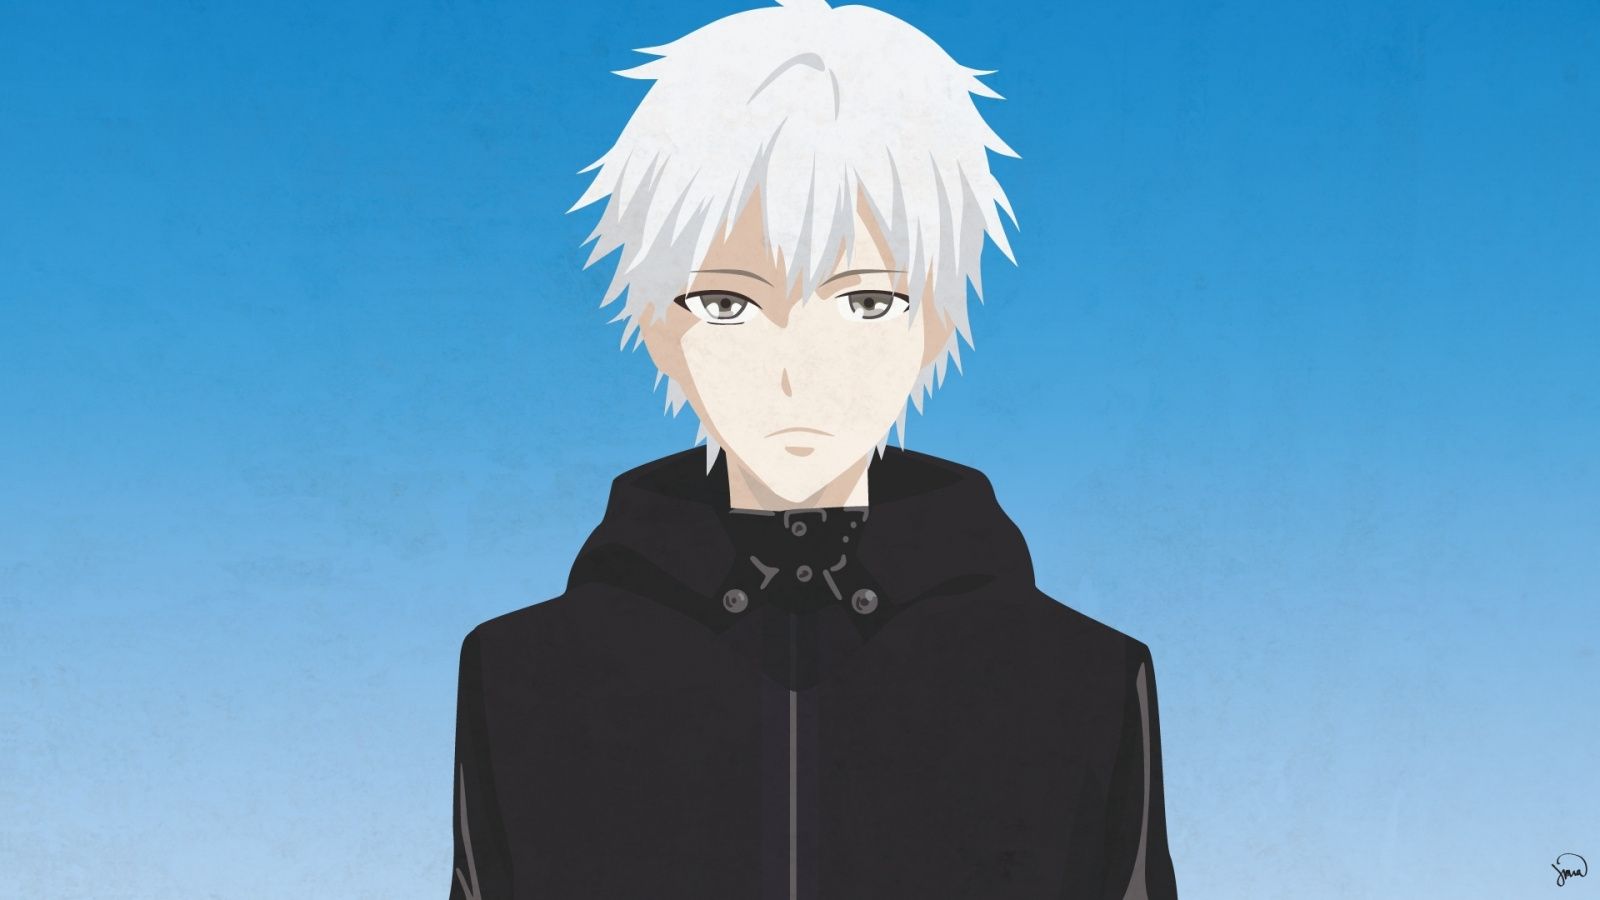 Post a male anime character with silver/white hair. - Anime Answers - Fanpop